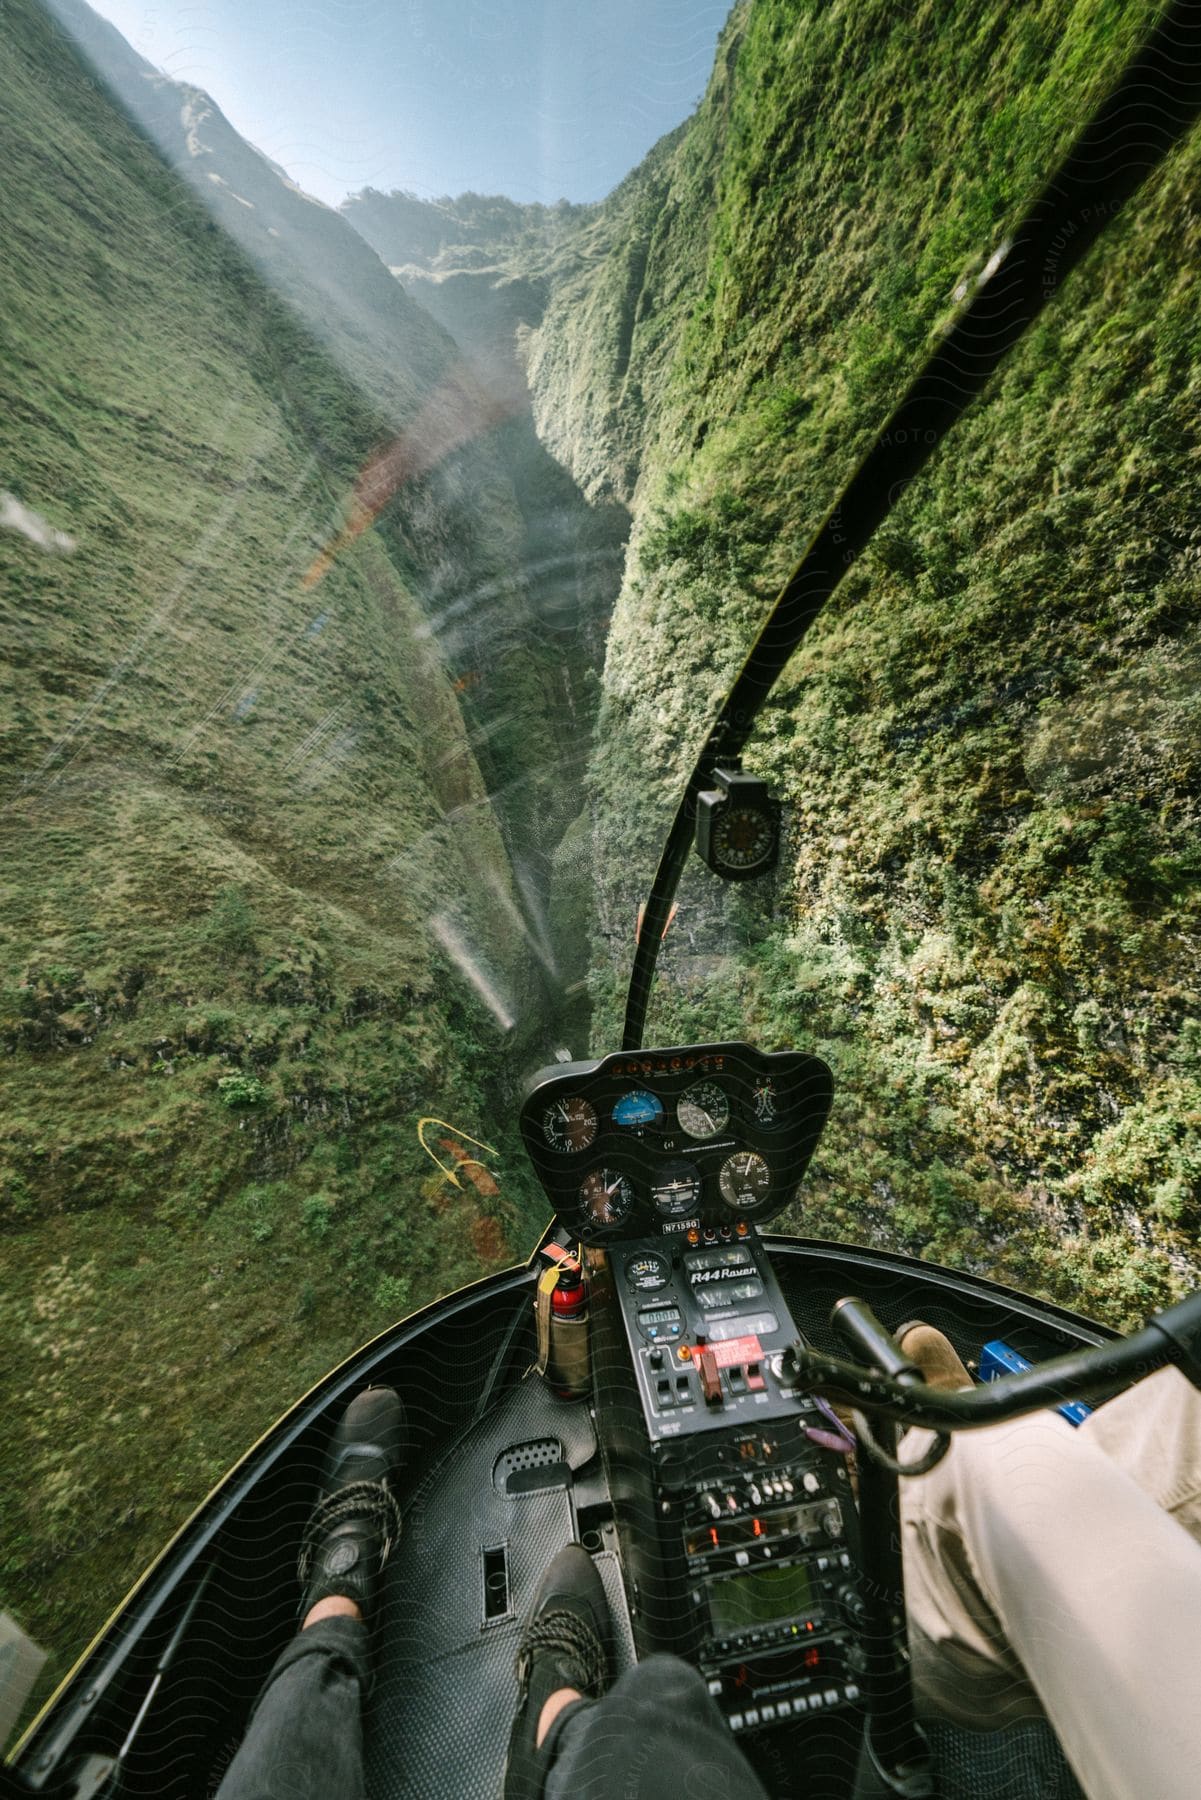 Two men enjoy a breathtaking sight of mountains and green valleys from a helicopter cockpit